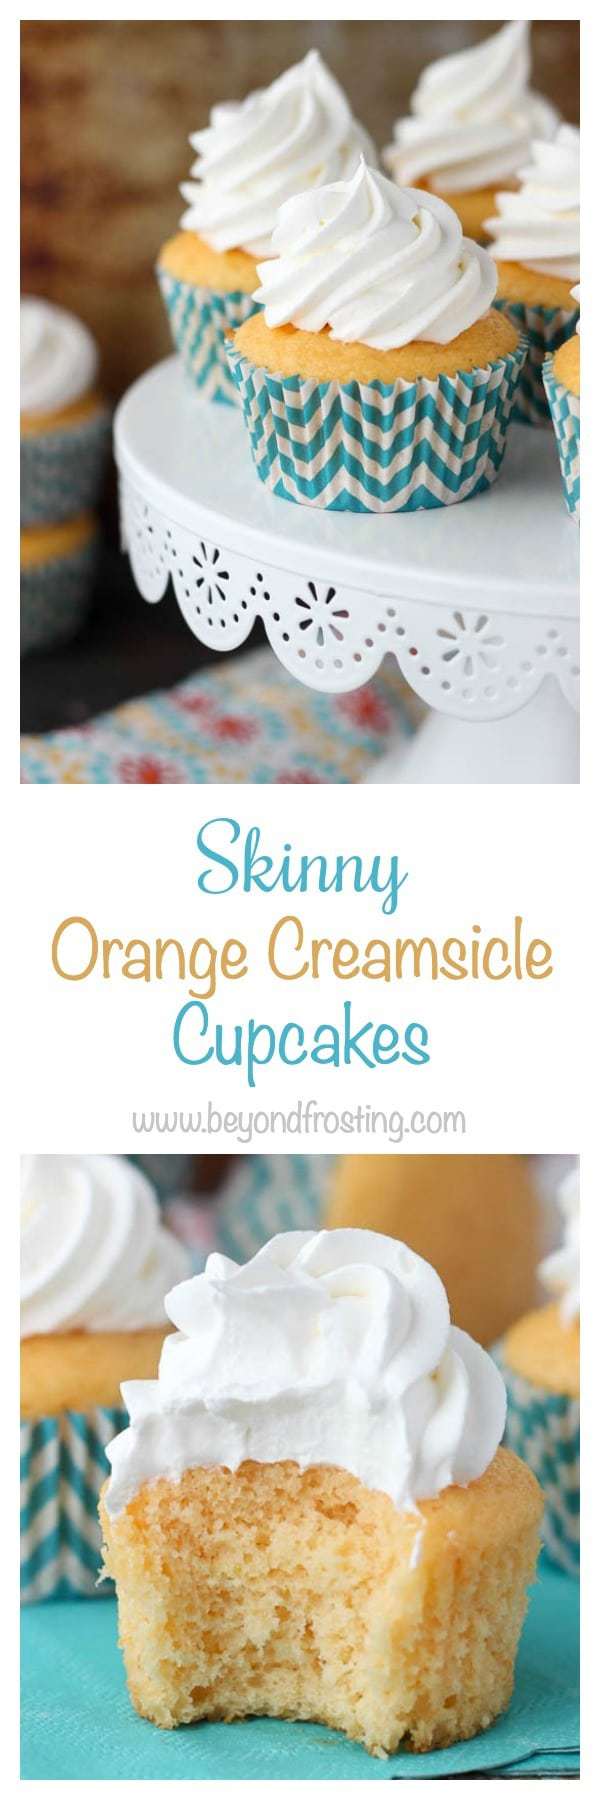  These Skinny Orange Creamsicle Cupcakes are full of flavor but without all the extra calories! The orange flavored cupcake it topped with a fat-free whipped topping.